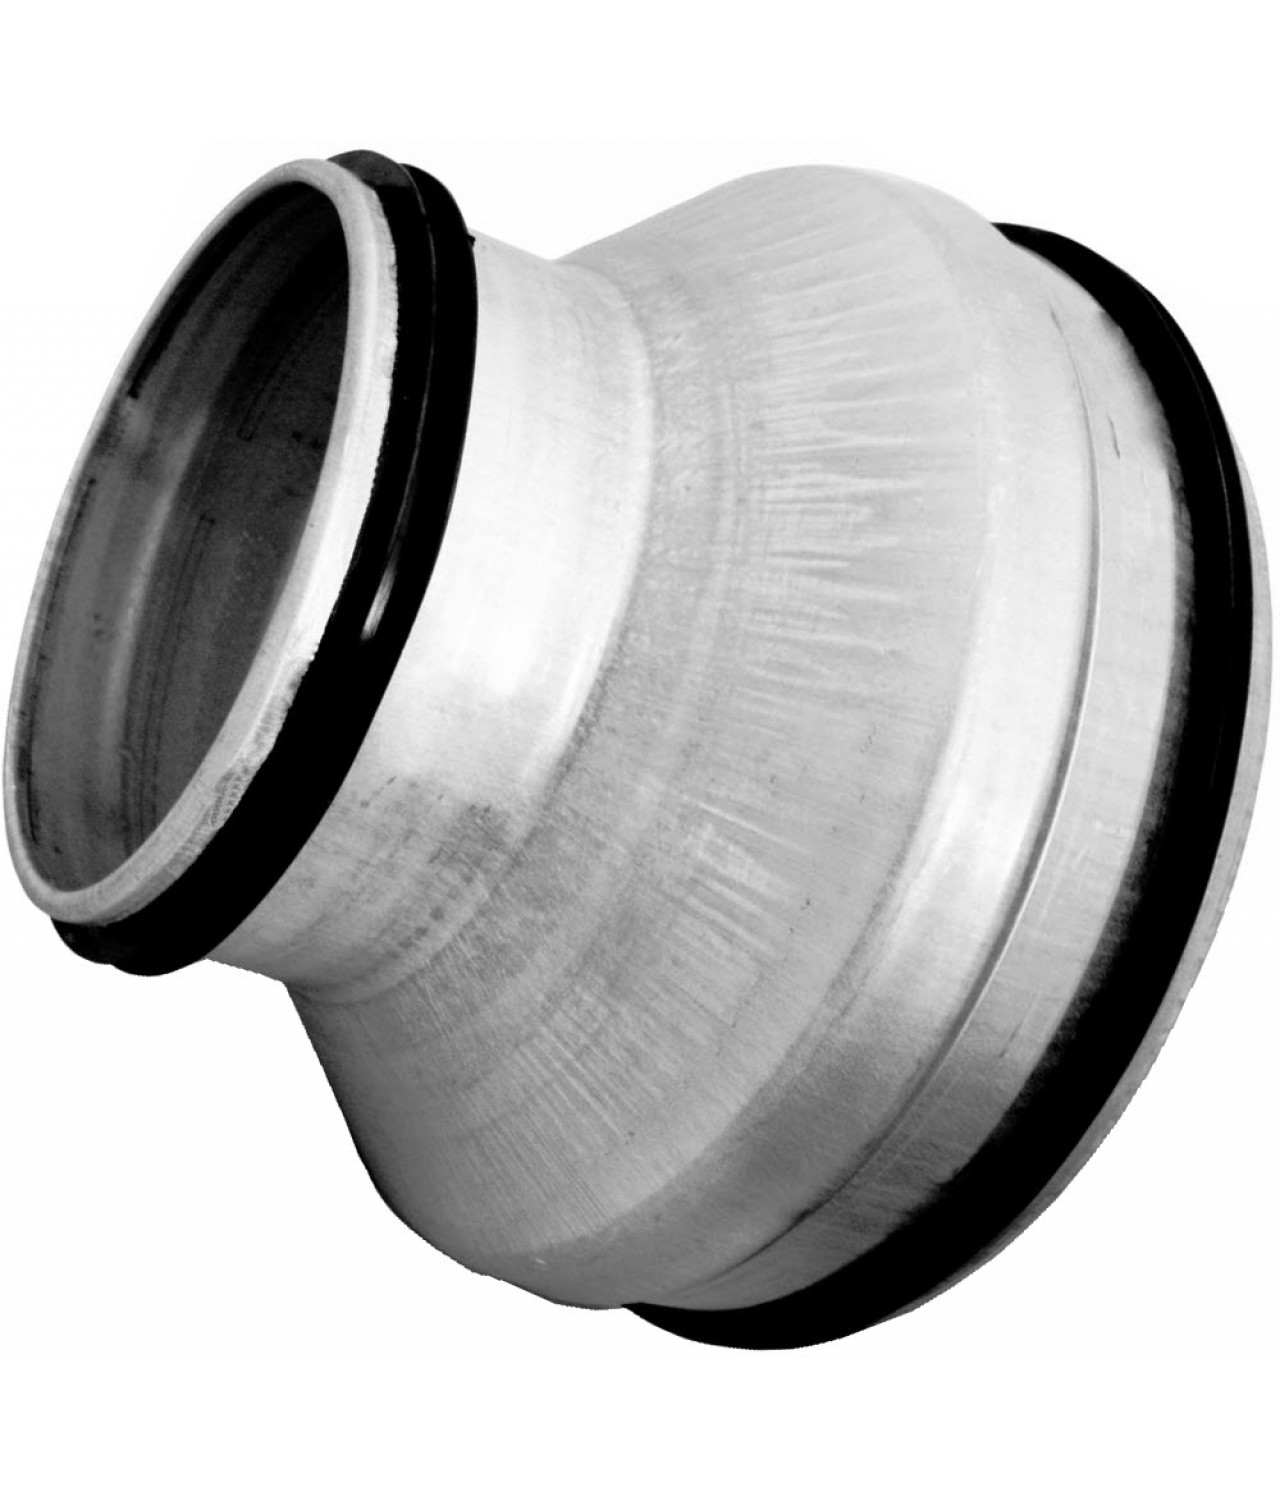 Symmetrical reducers for ducts RG